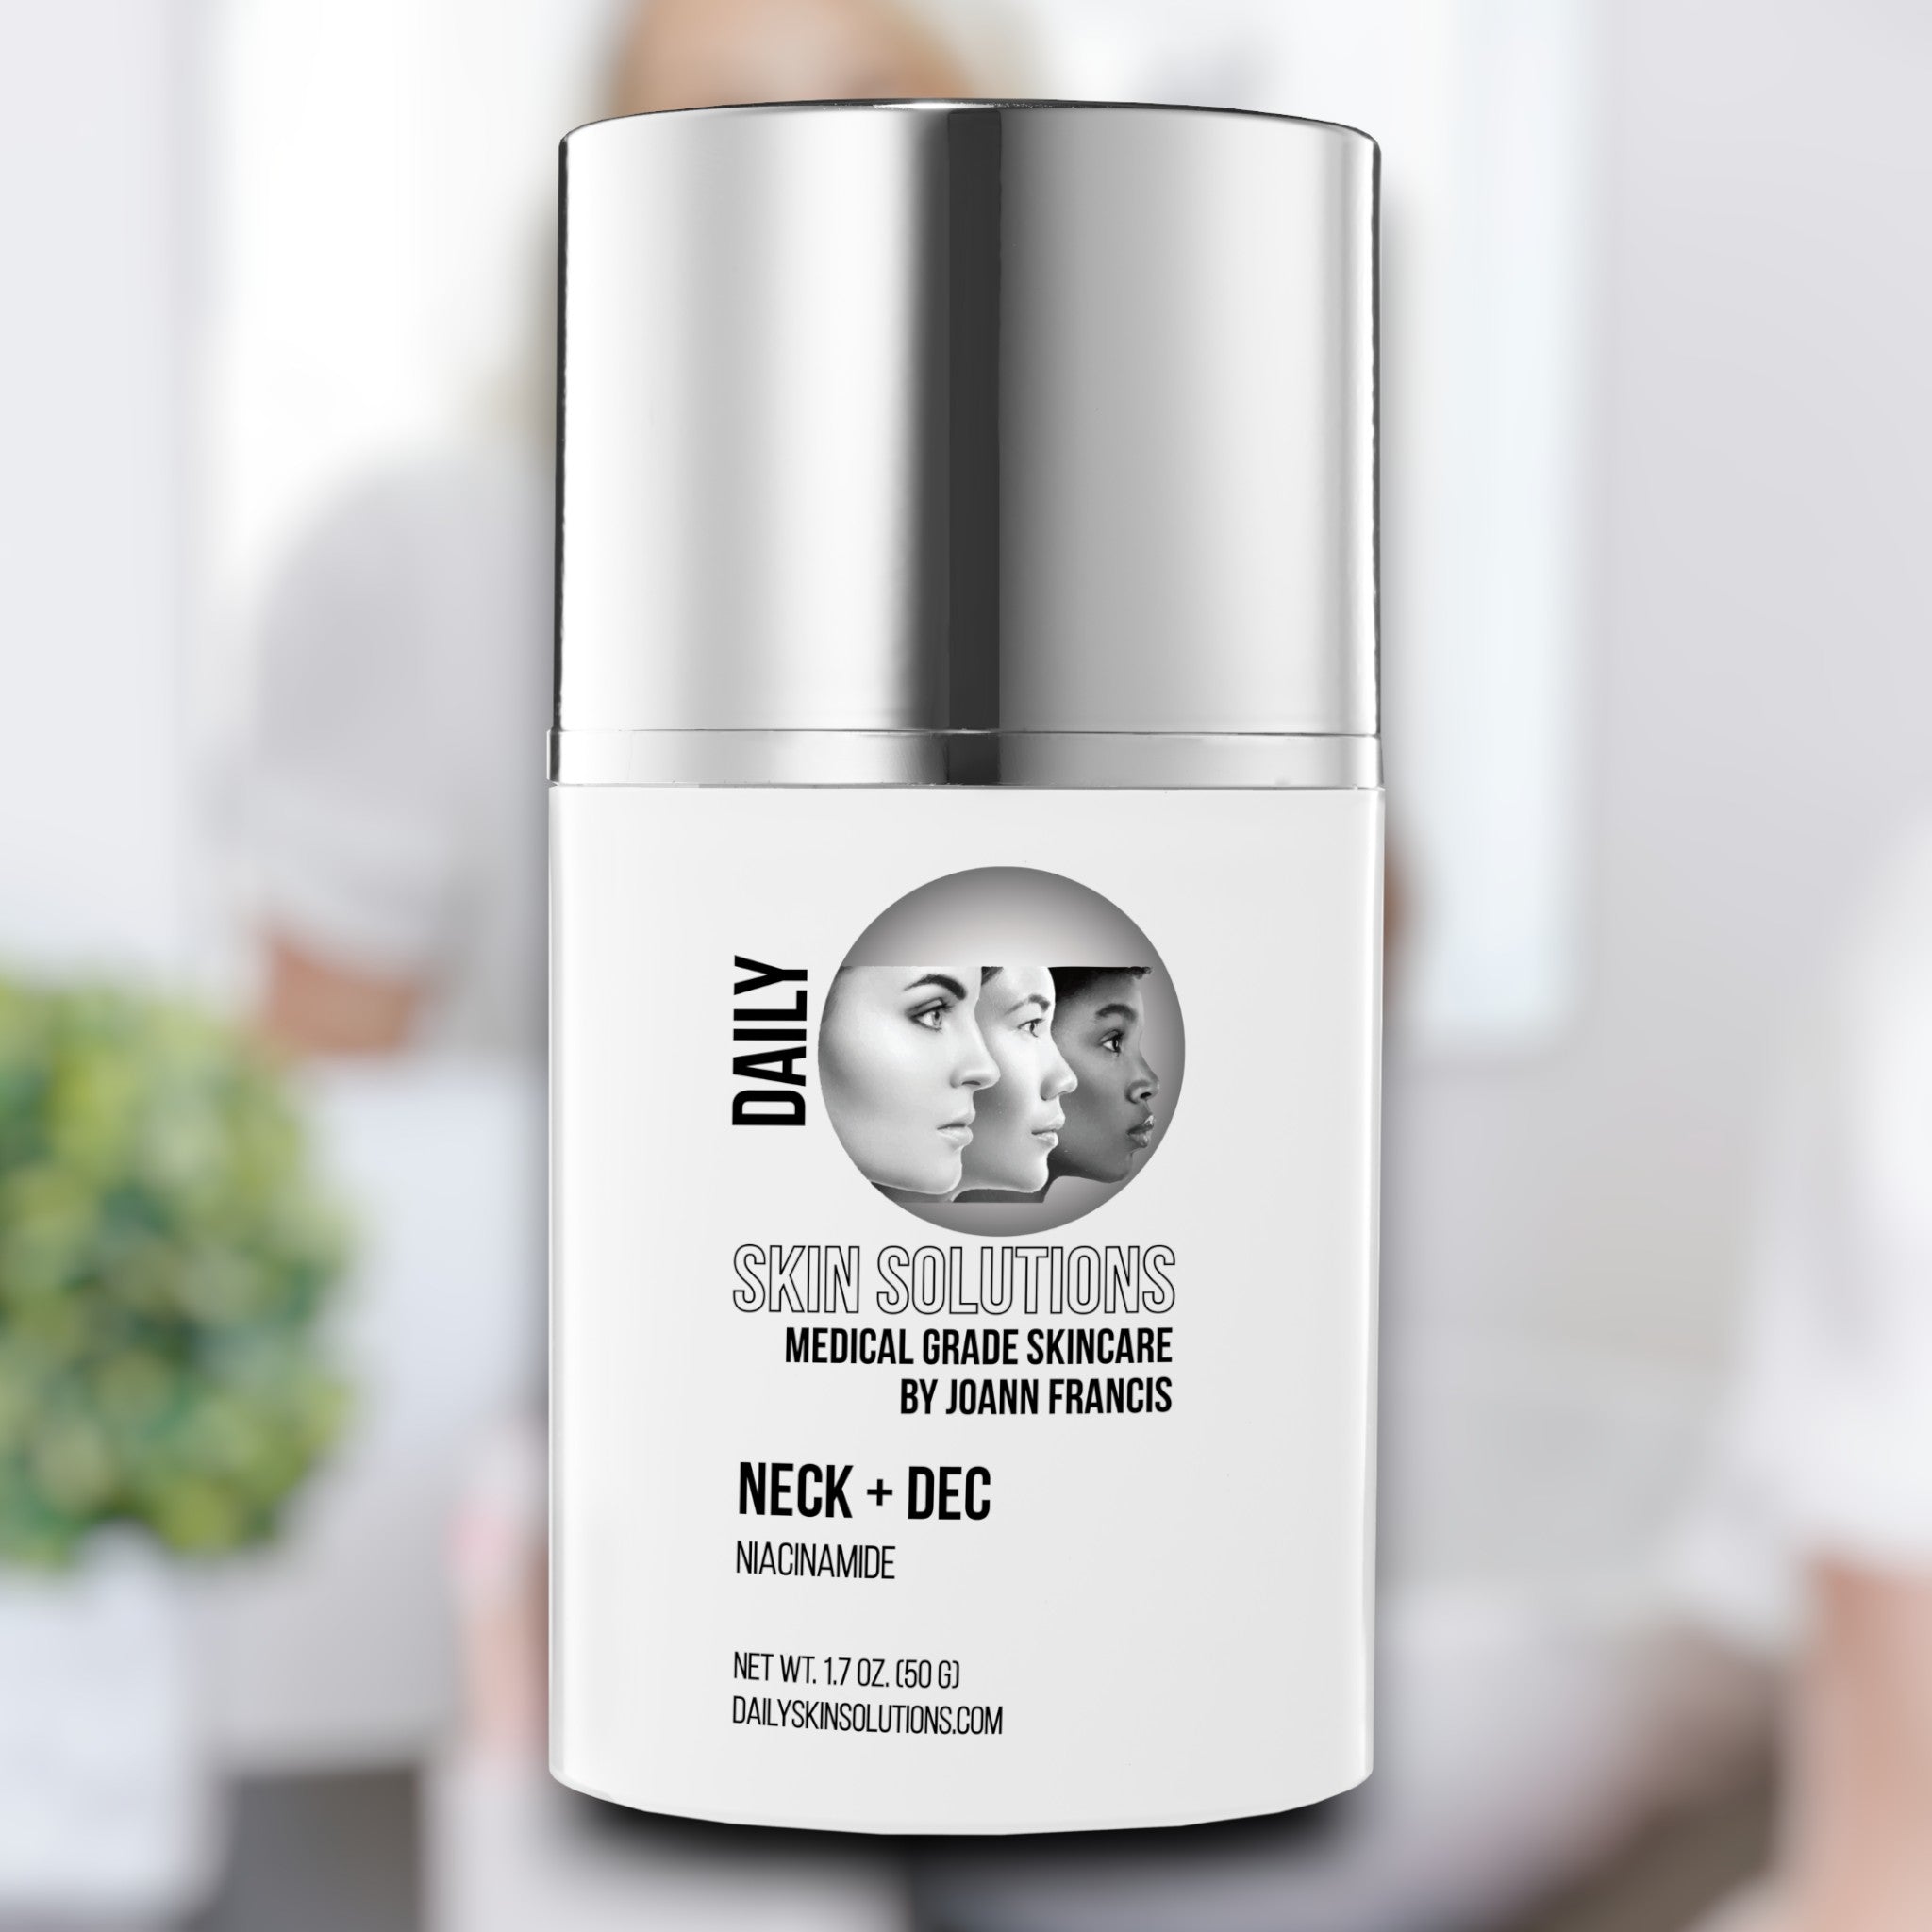 Neck + Dec Anti-aging creme for the neck and declotte by Daily Skn Solutions